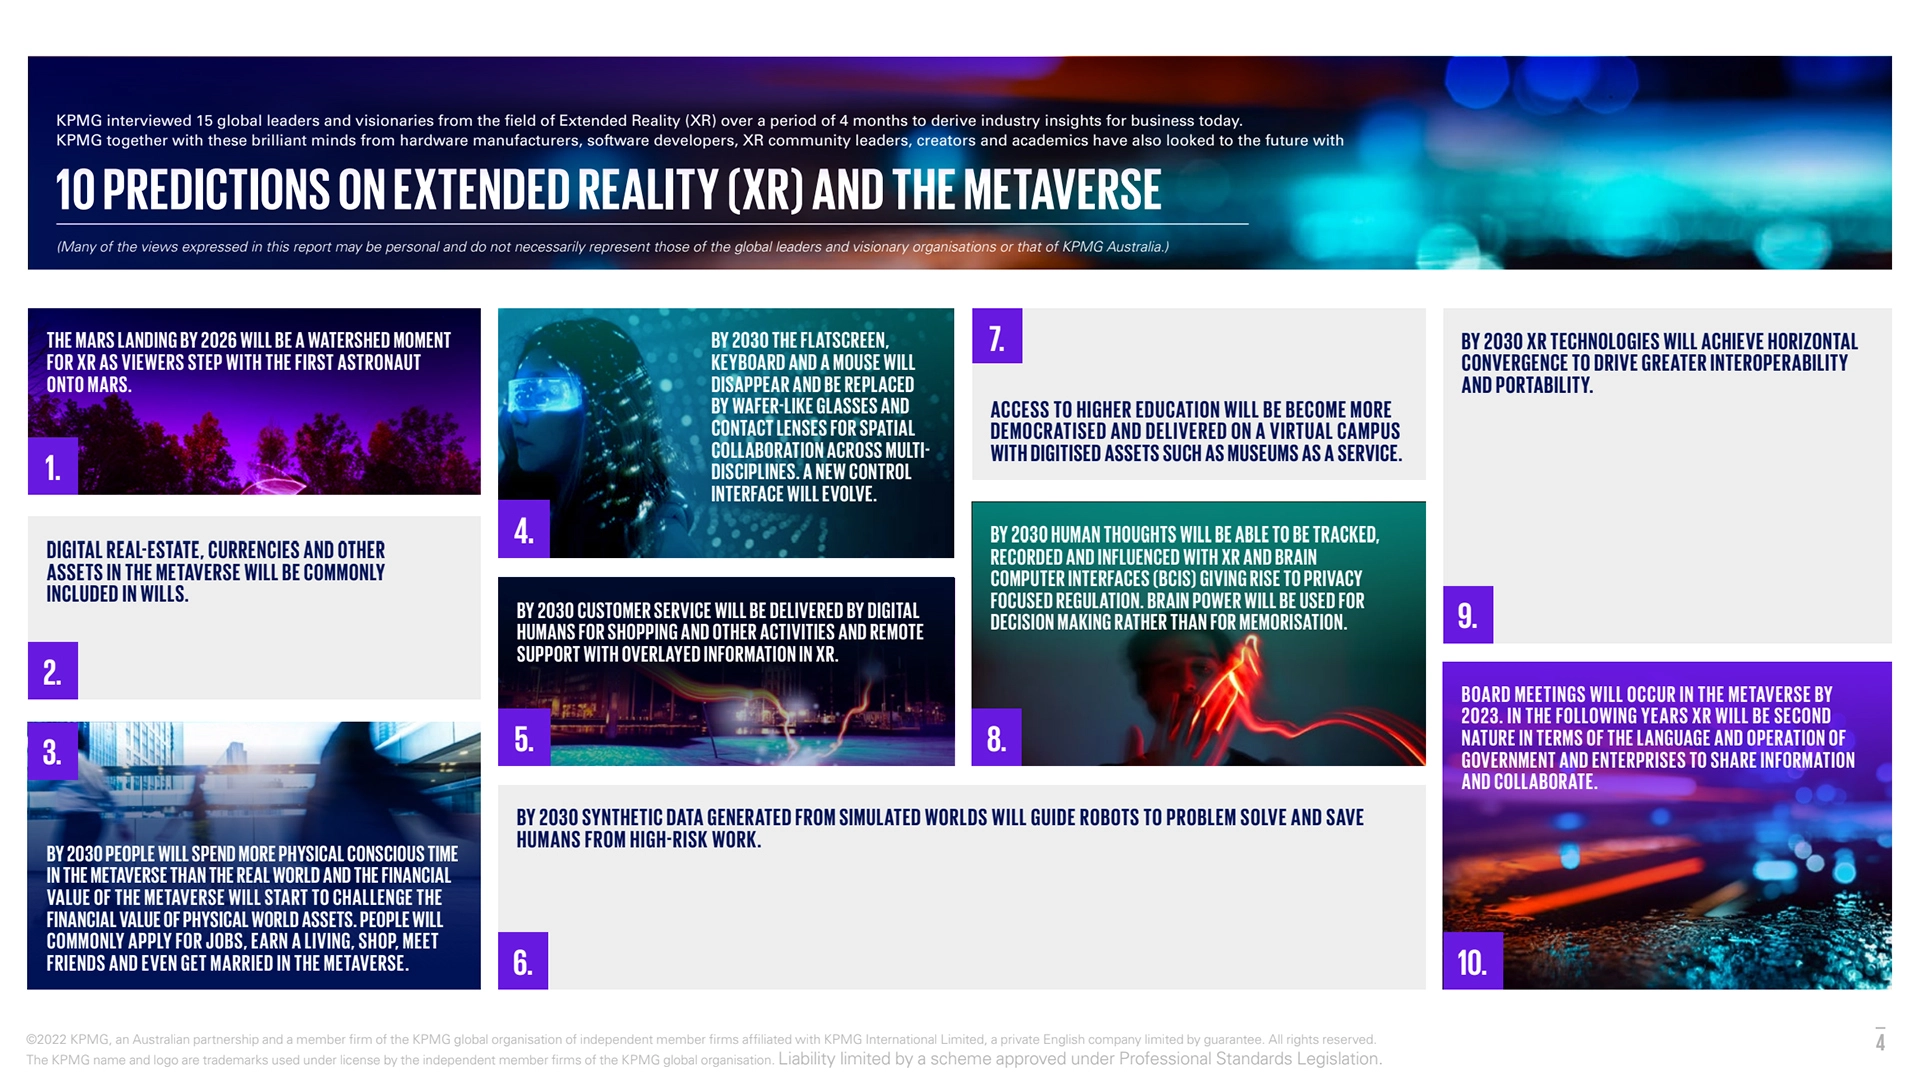 Whitepaper KPMG: “The future of Metaverse and Extended Reality” - 10 predictions